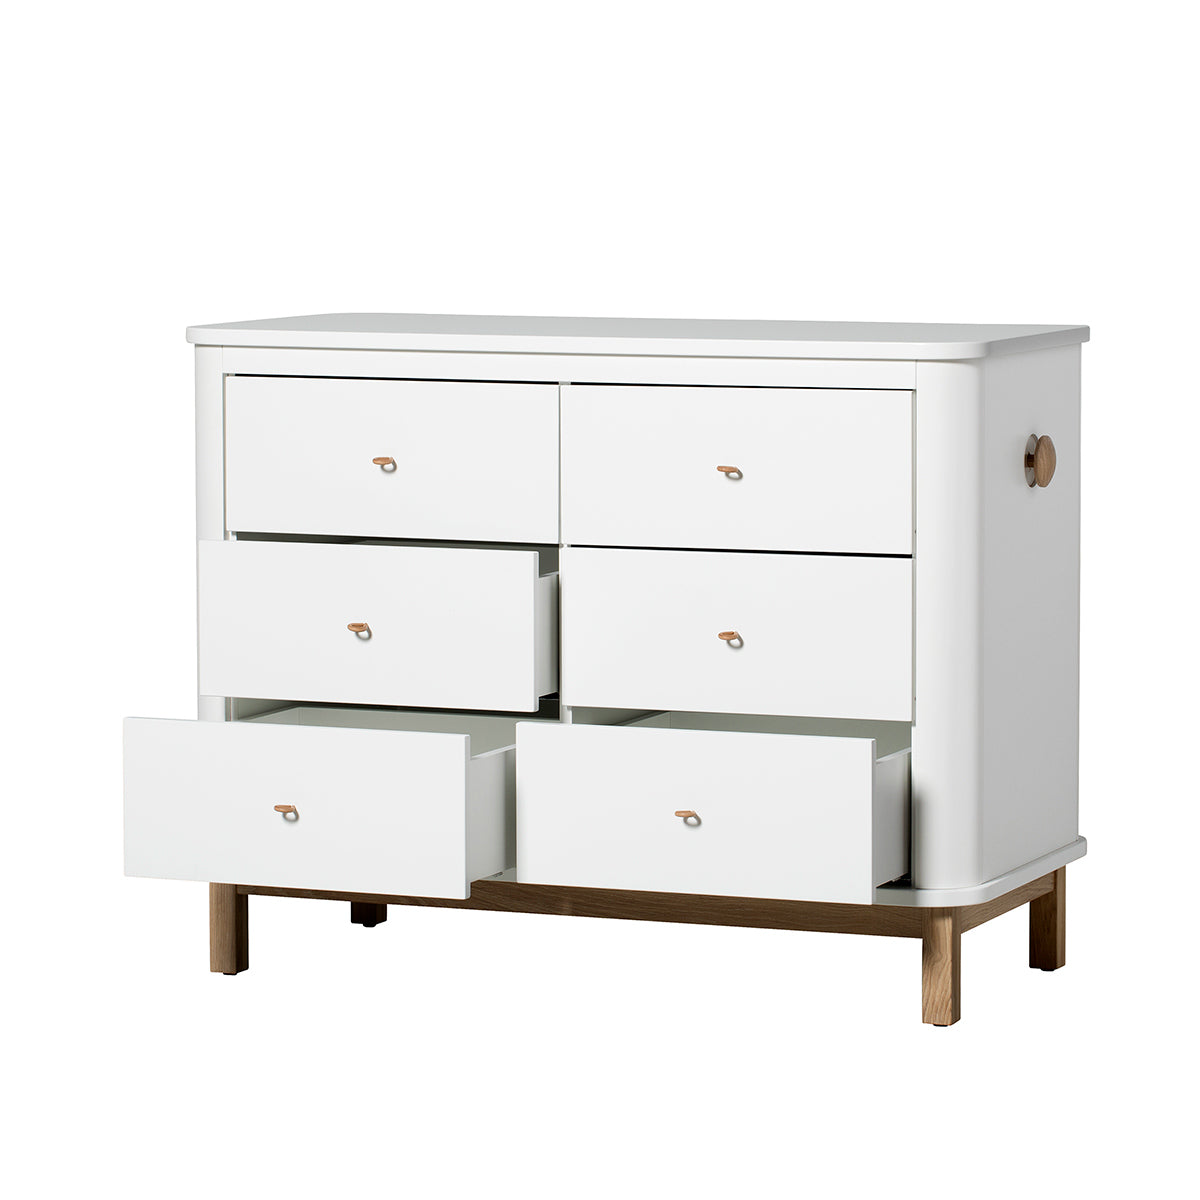 Oliver Furniture grande commode Wood Collection avec 6 tiroirs, blanc/chêne